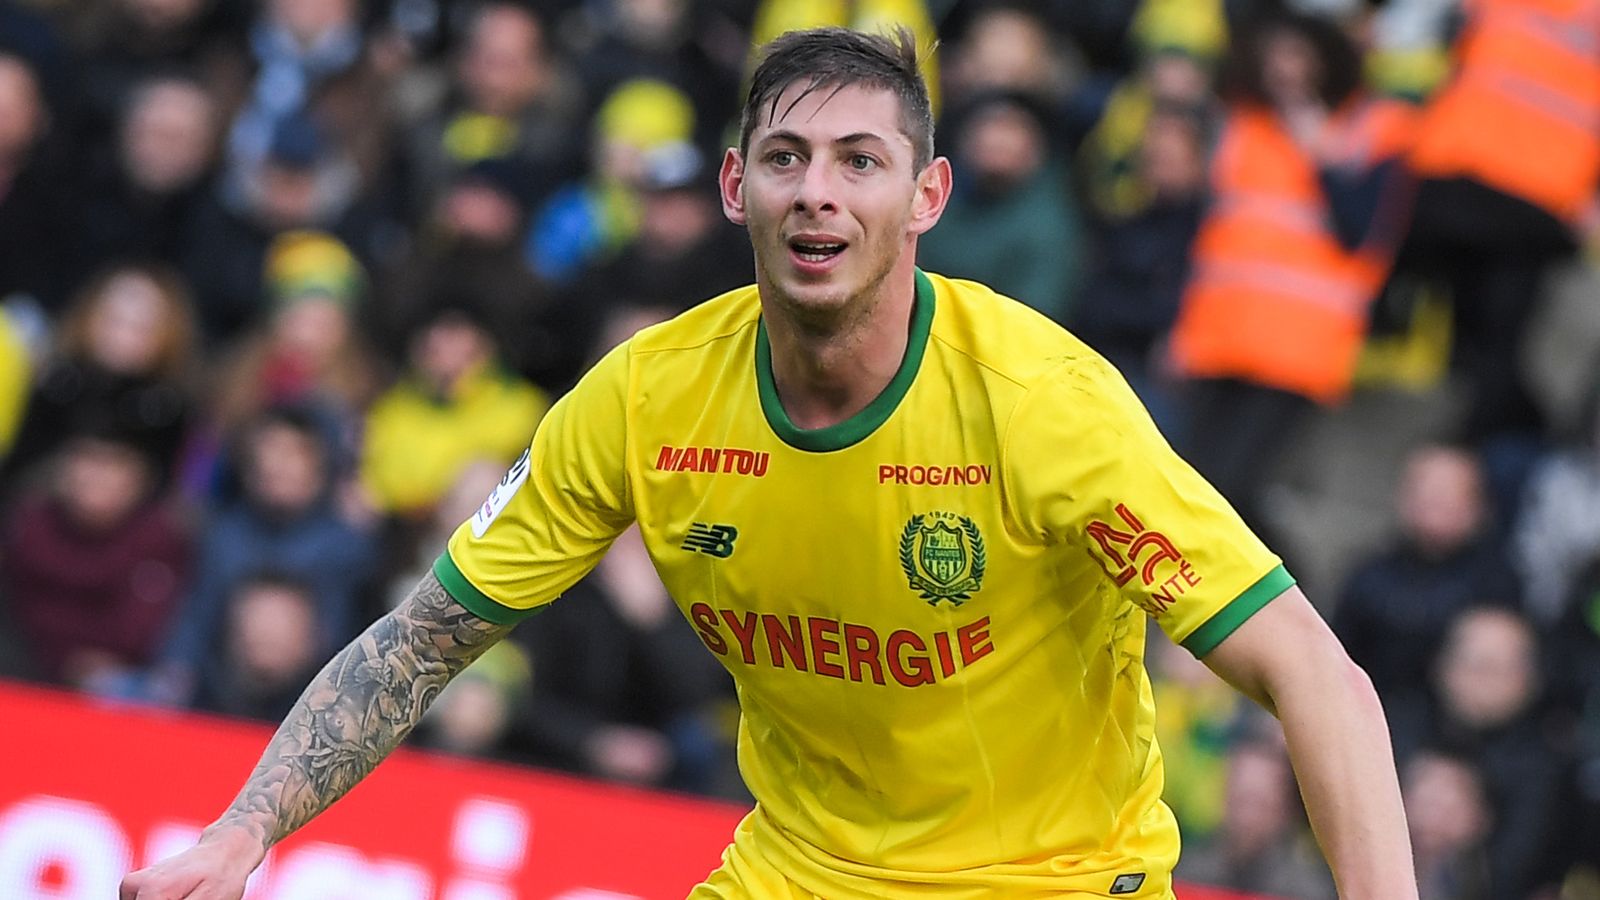 Nantes pay tribute to Emiliano Sala ahead of their first home match since his body was identified | Football News | Sky Sports